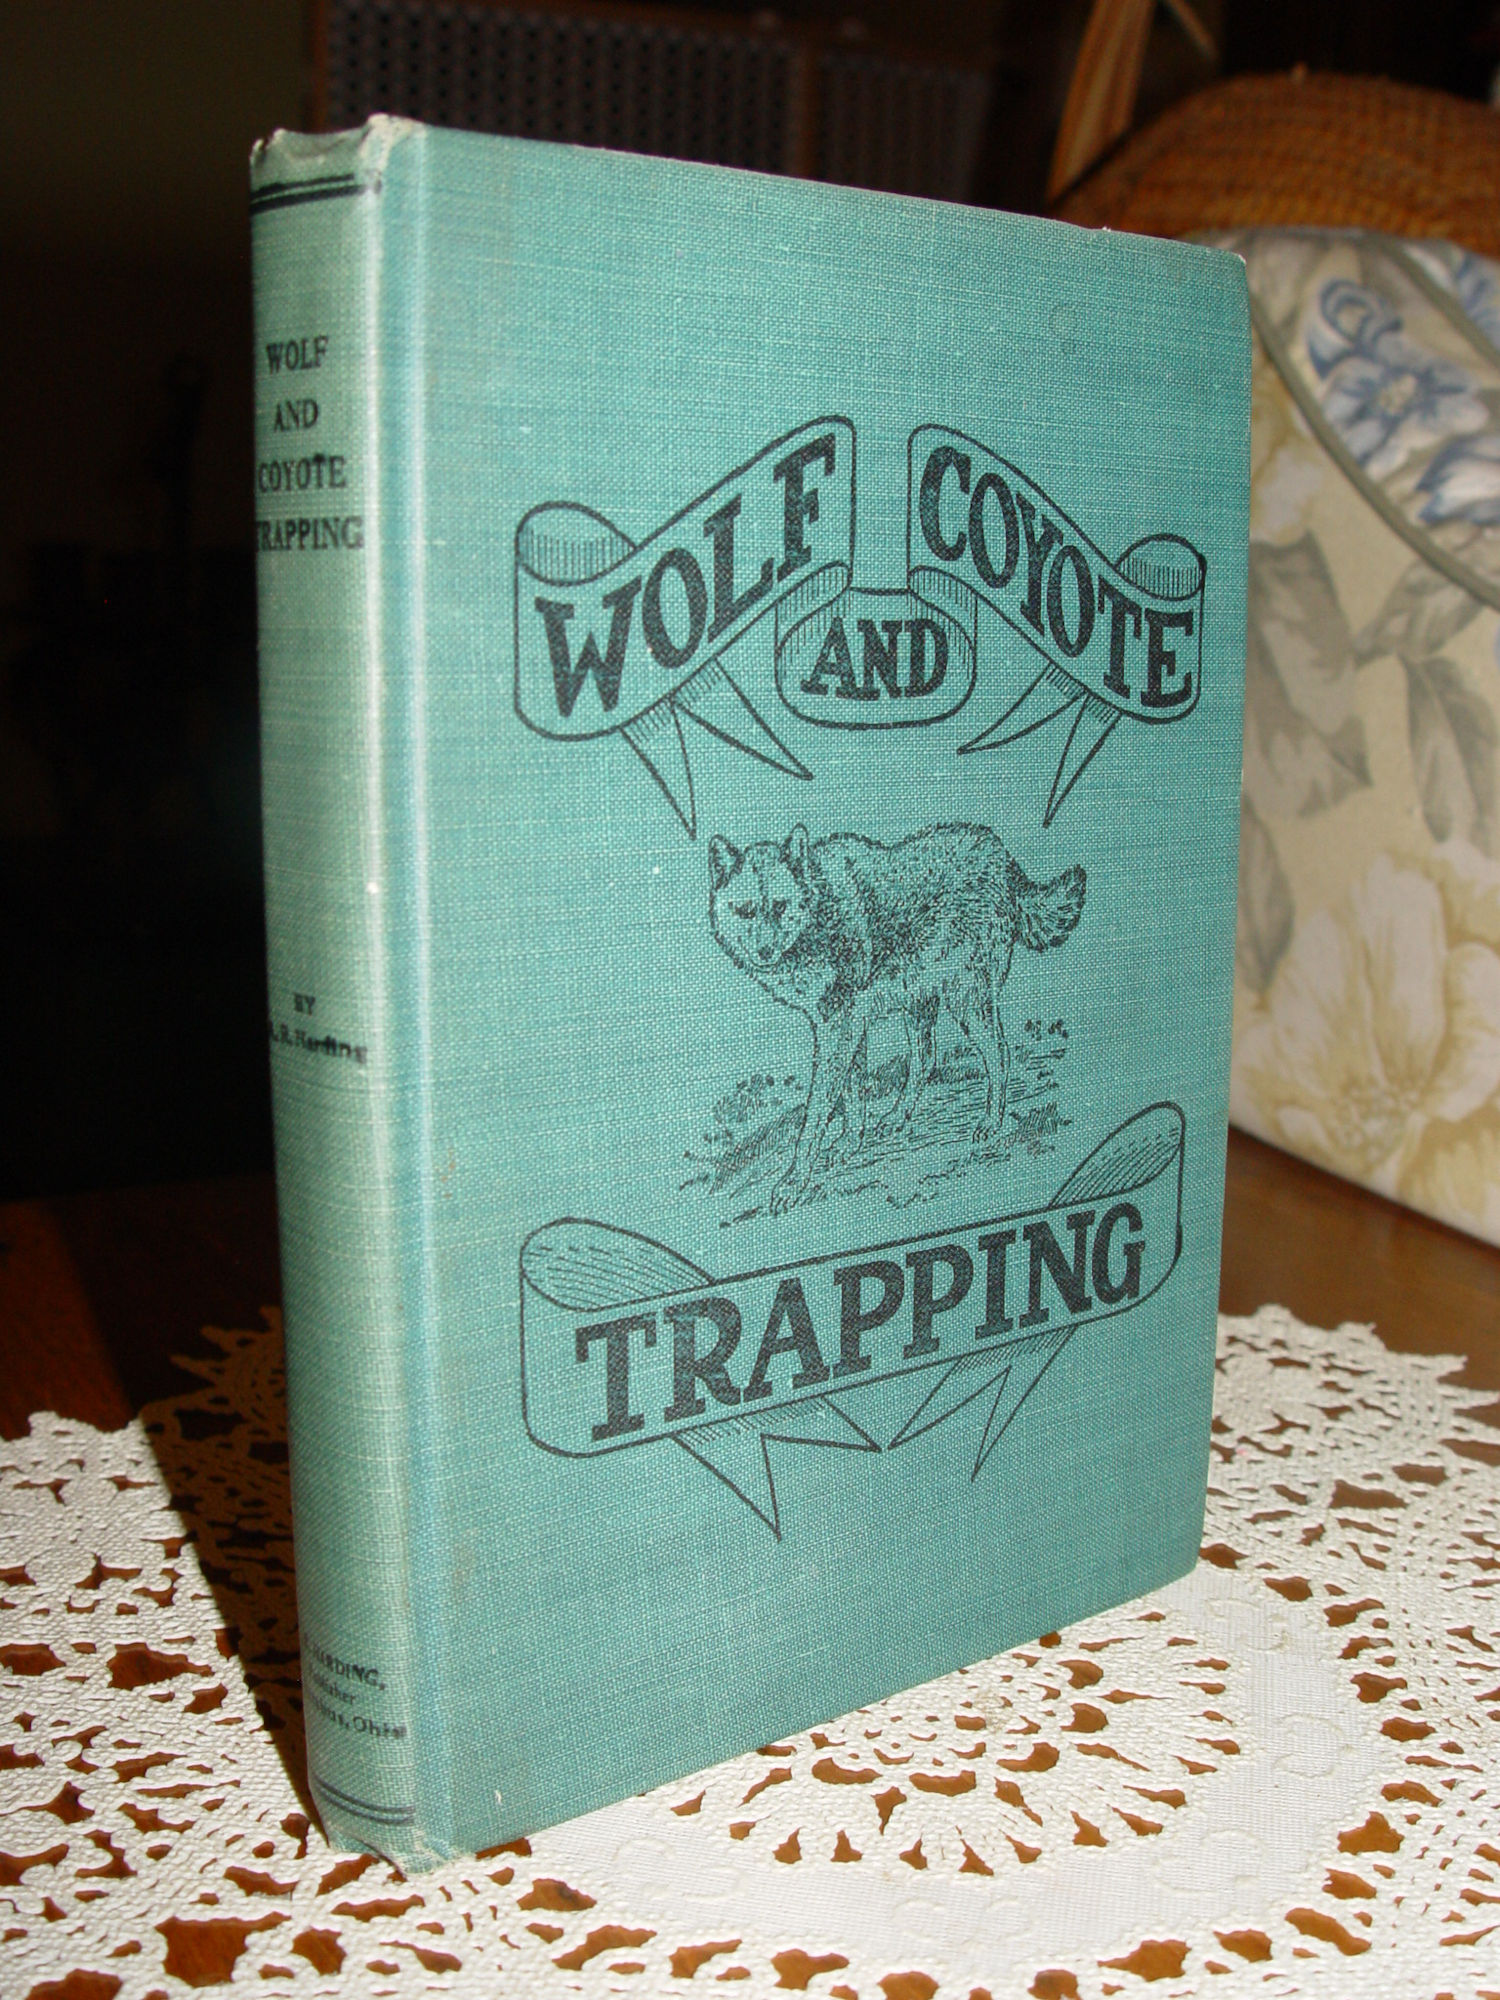 Wolf and Coyote Trapping 1937 by A.R.
                        Harding